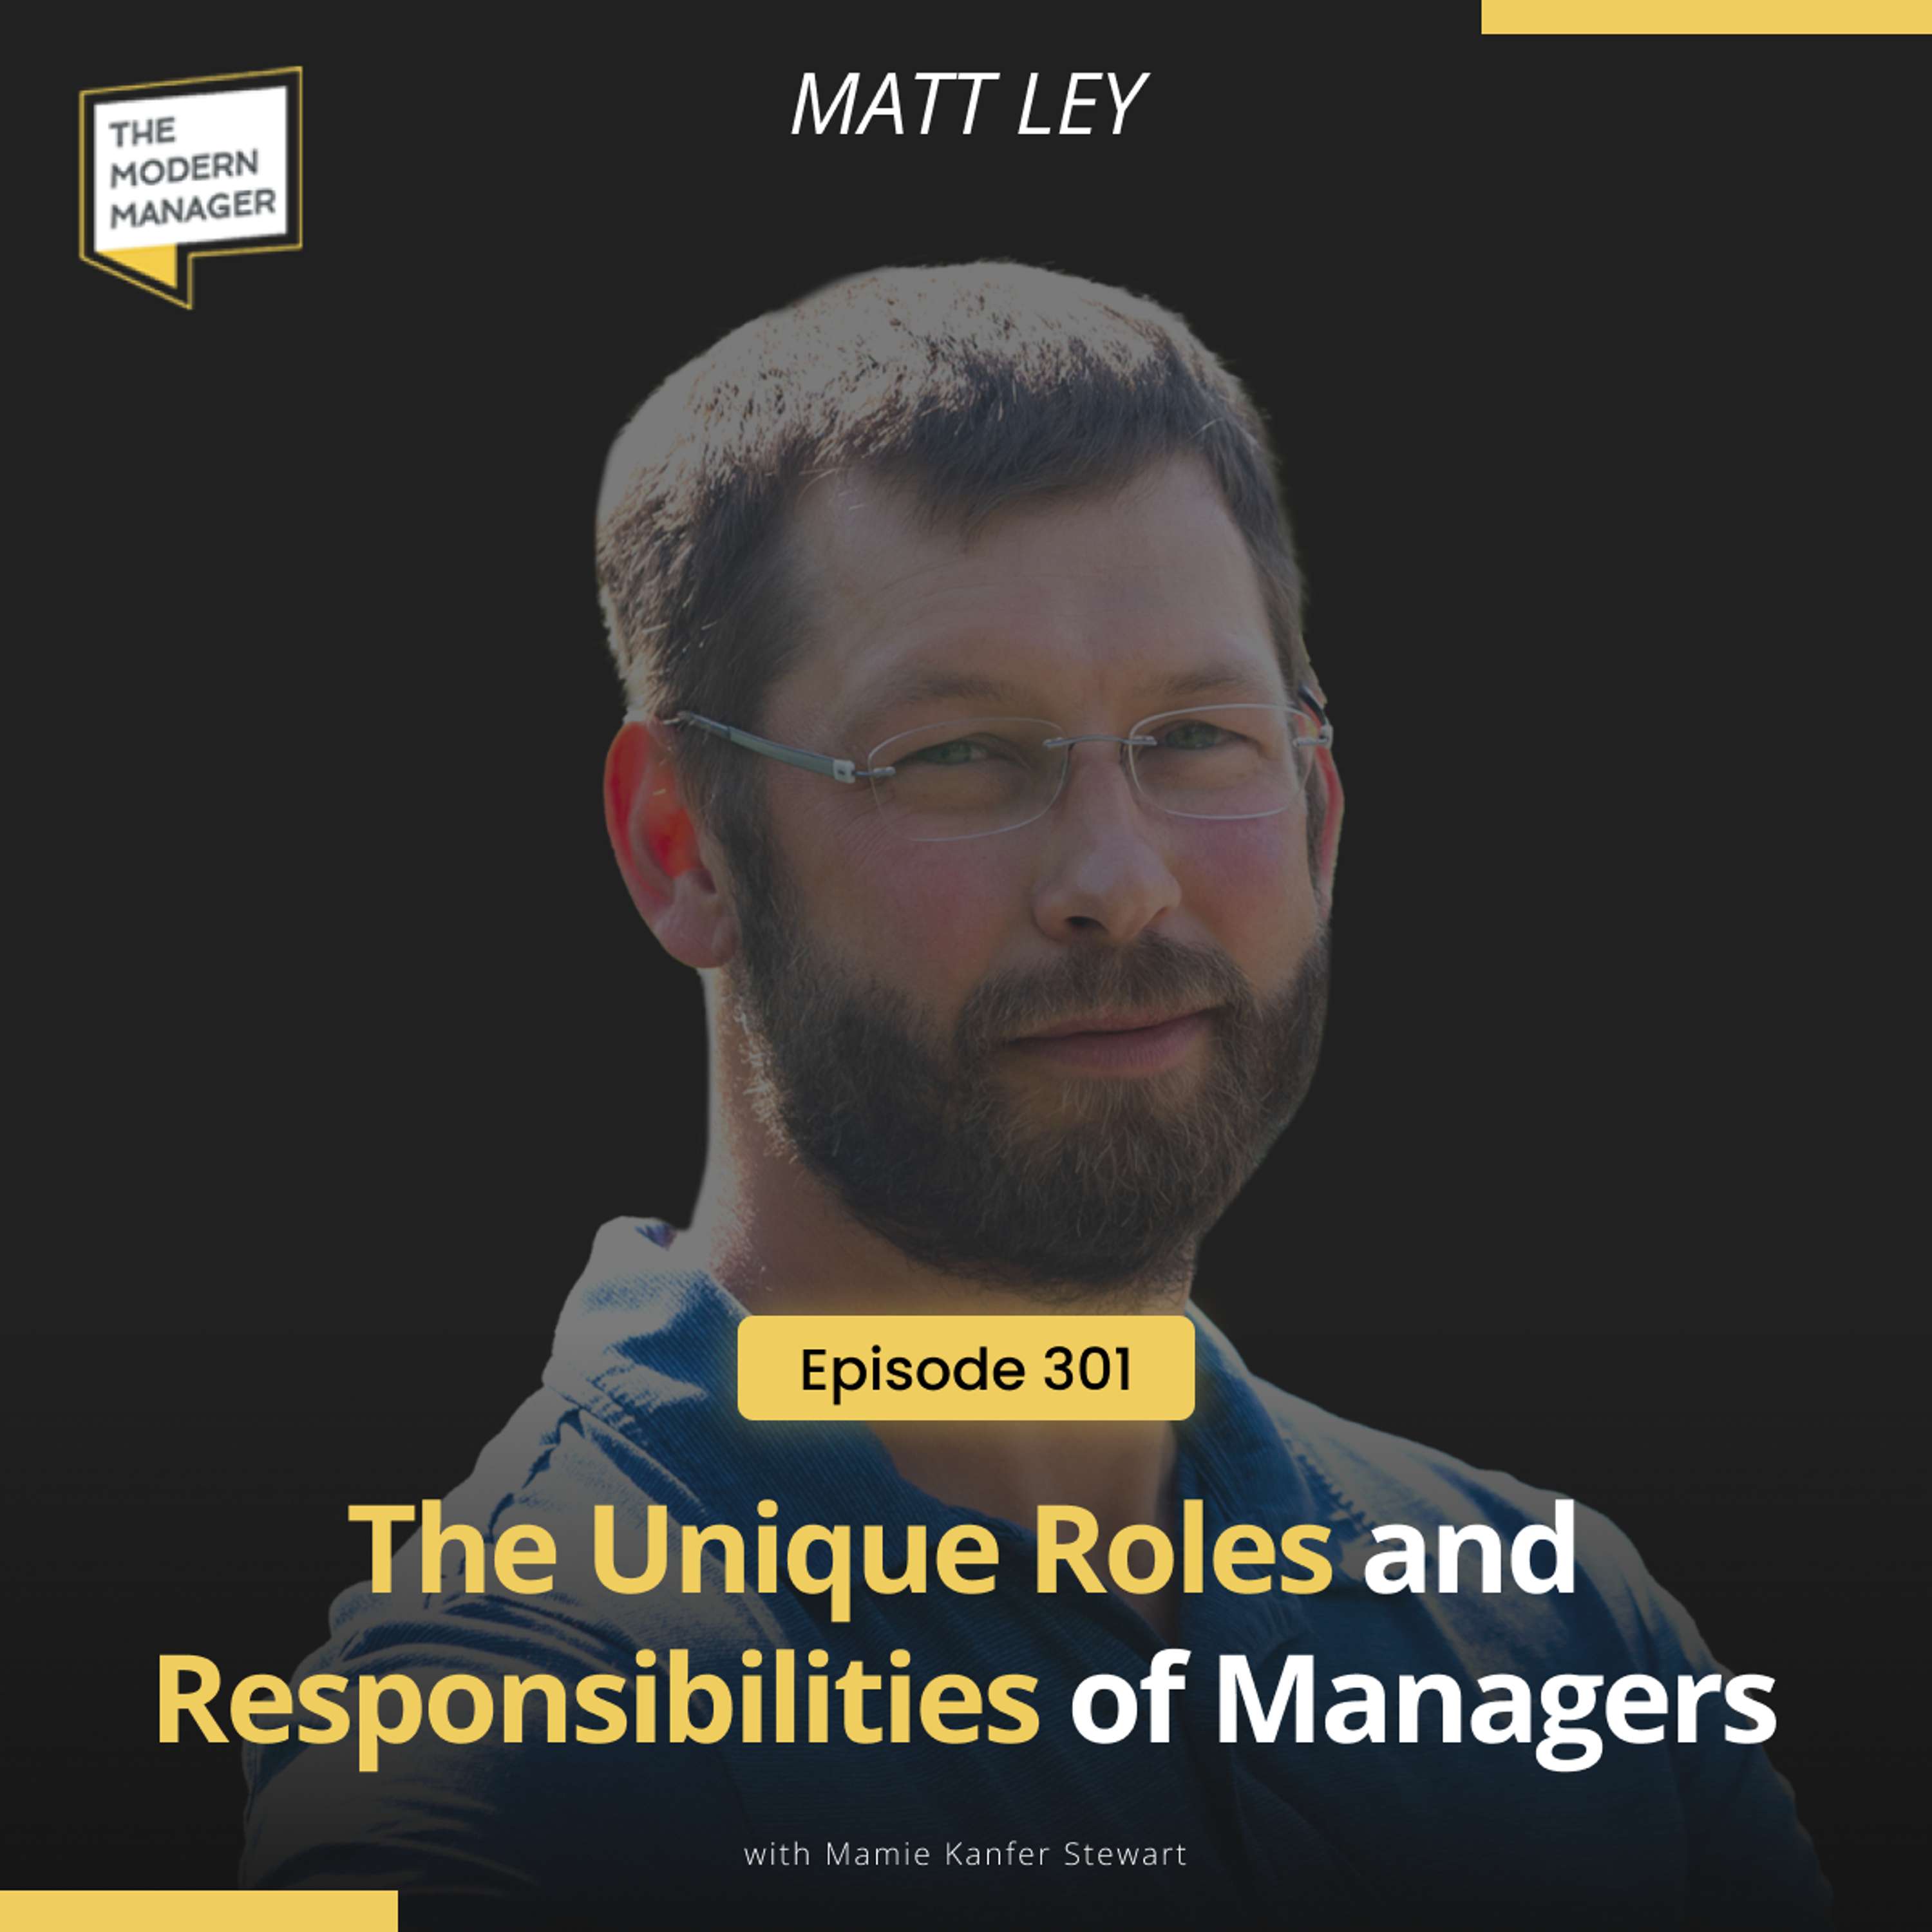 301: The Unique Roles and Responsibilities of Managers with Matt Ley